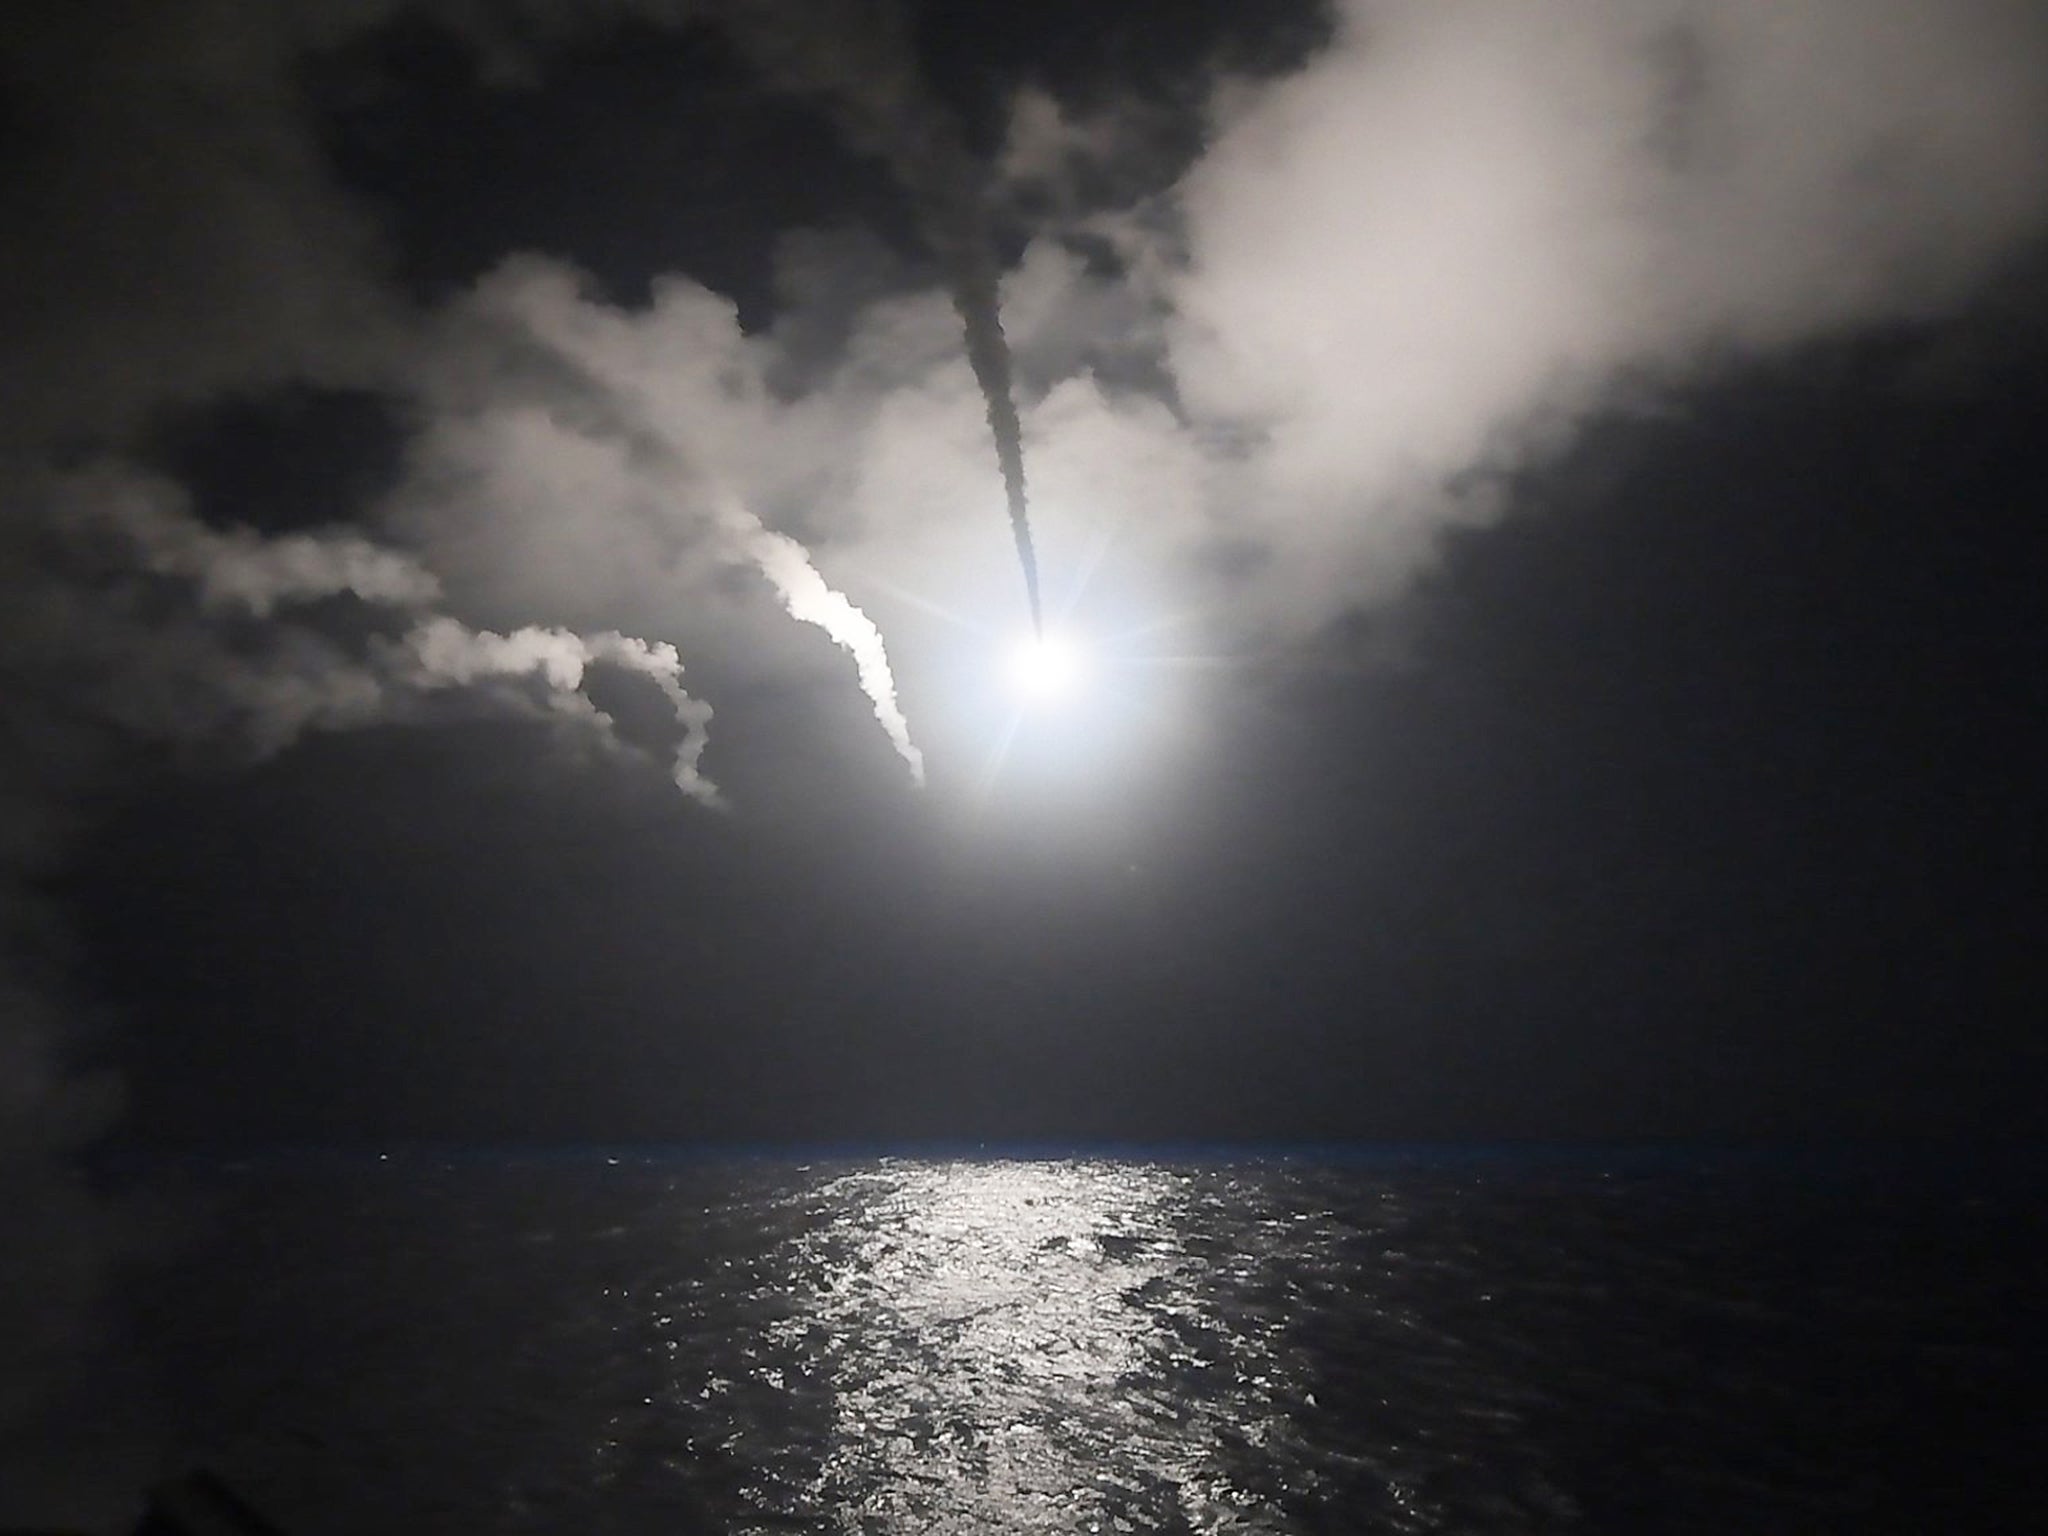 The United States military launched at least 50 tomahawk cruise missiles at al-Shayrat military airfield near Homs, Syria